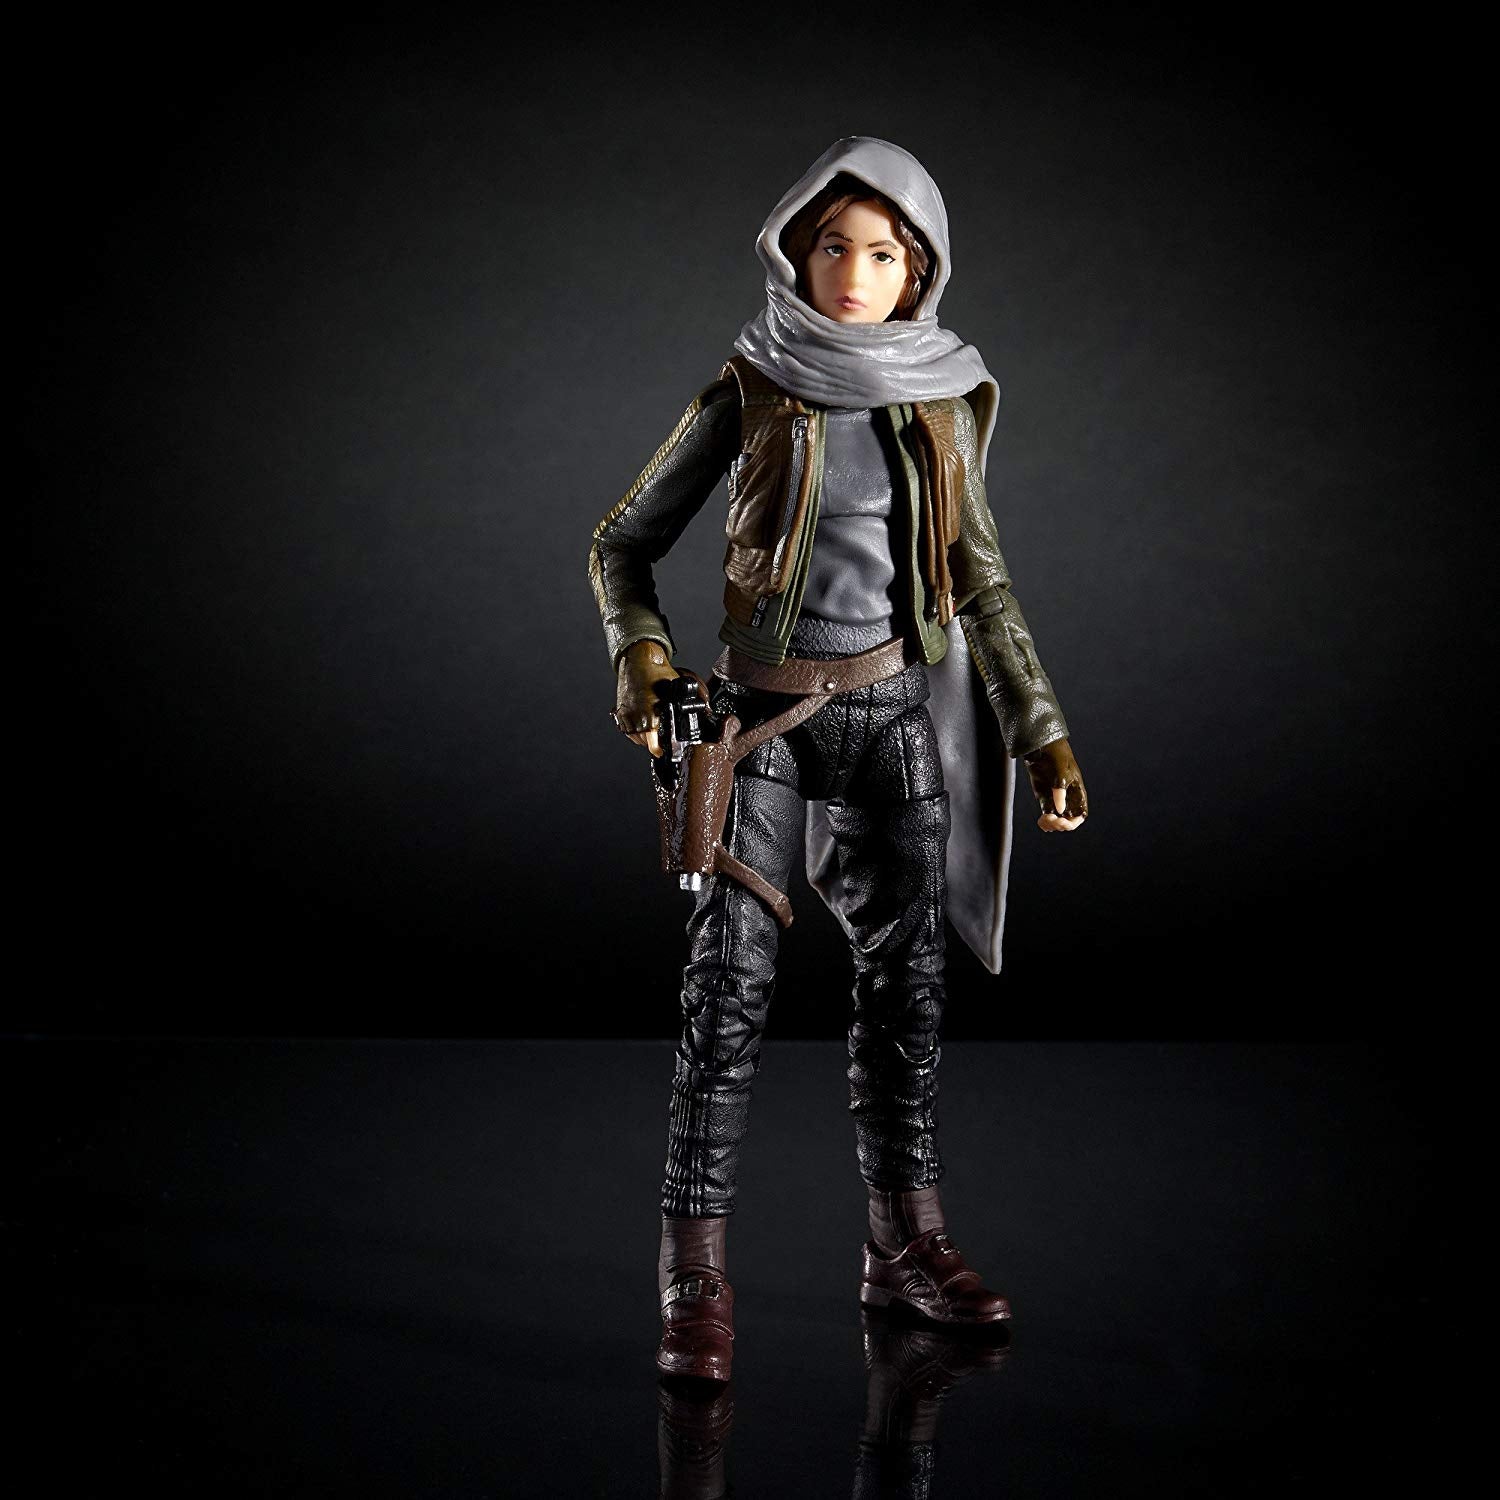 Hasbro Star Wars Black Series Force Awakens #22 Rogue One Sergeant Jyn Erso Jedha 6 Inch Action Figure